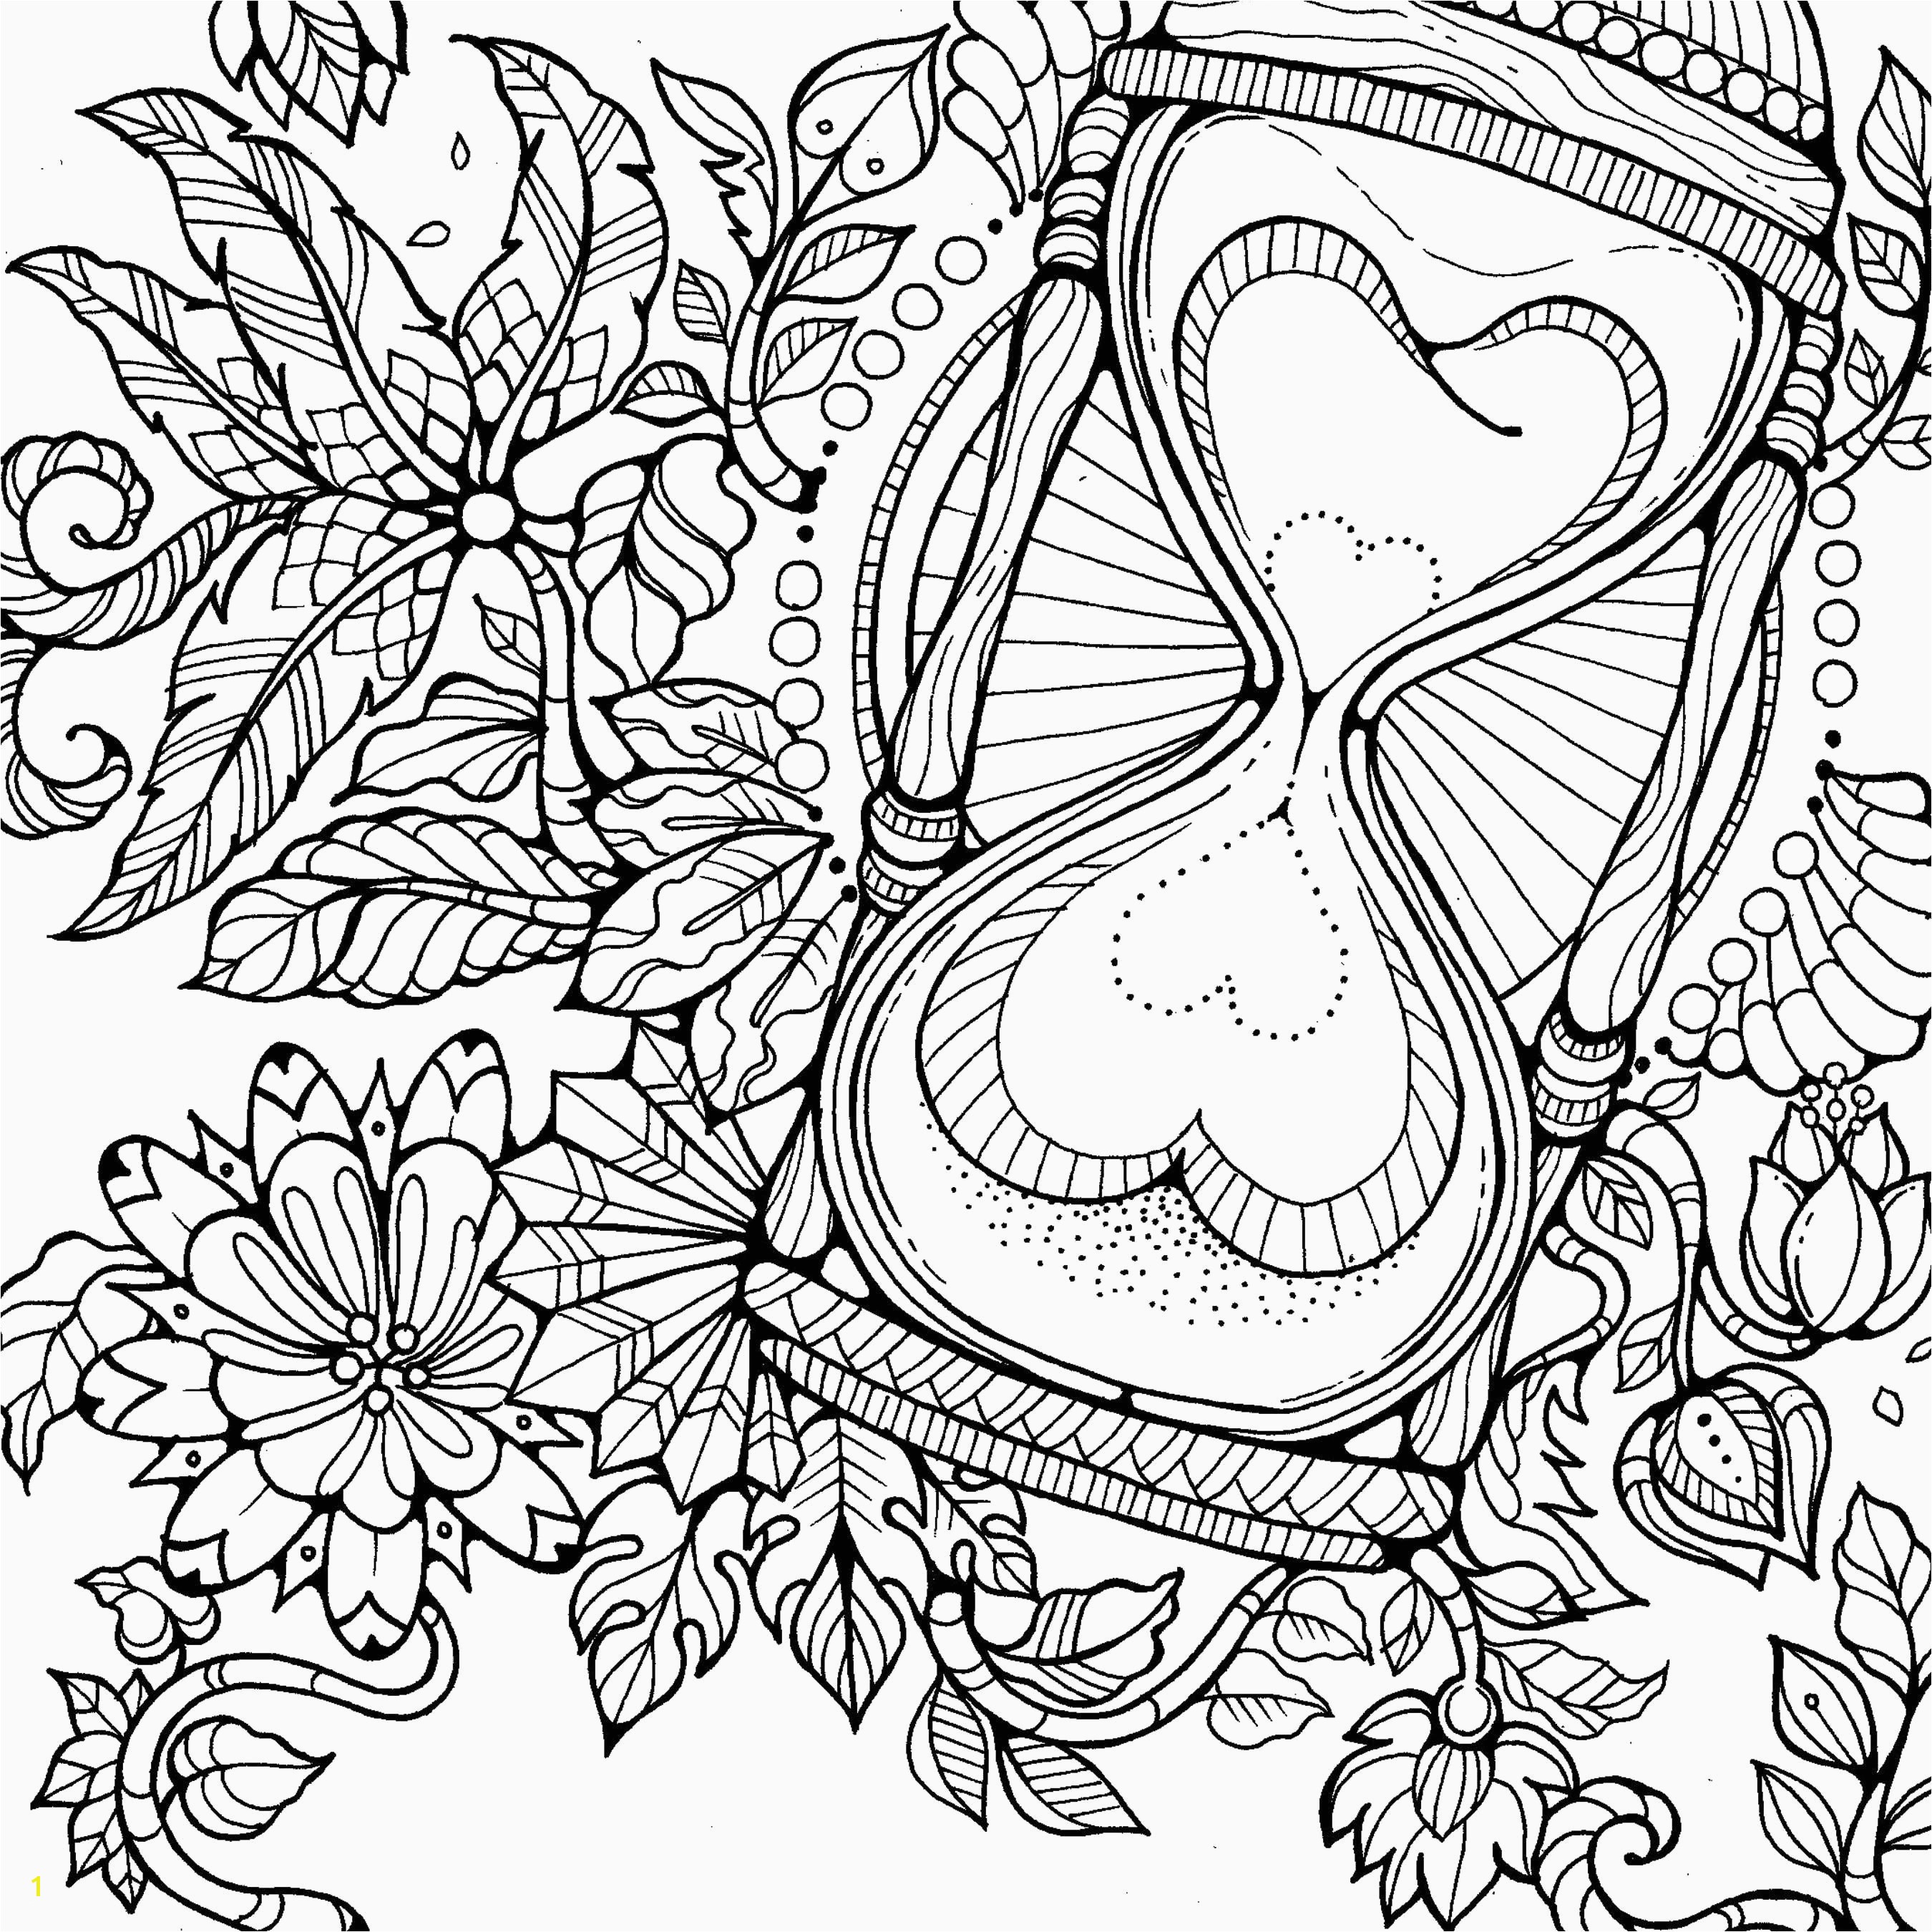 Popcorn Coloring Pages for Kids 14 Best Popcorn Coloring Page Image